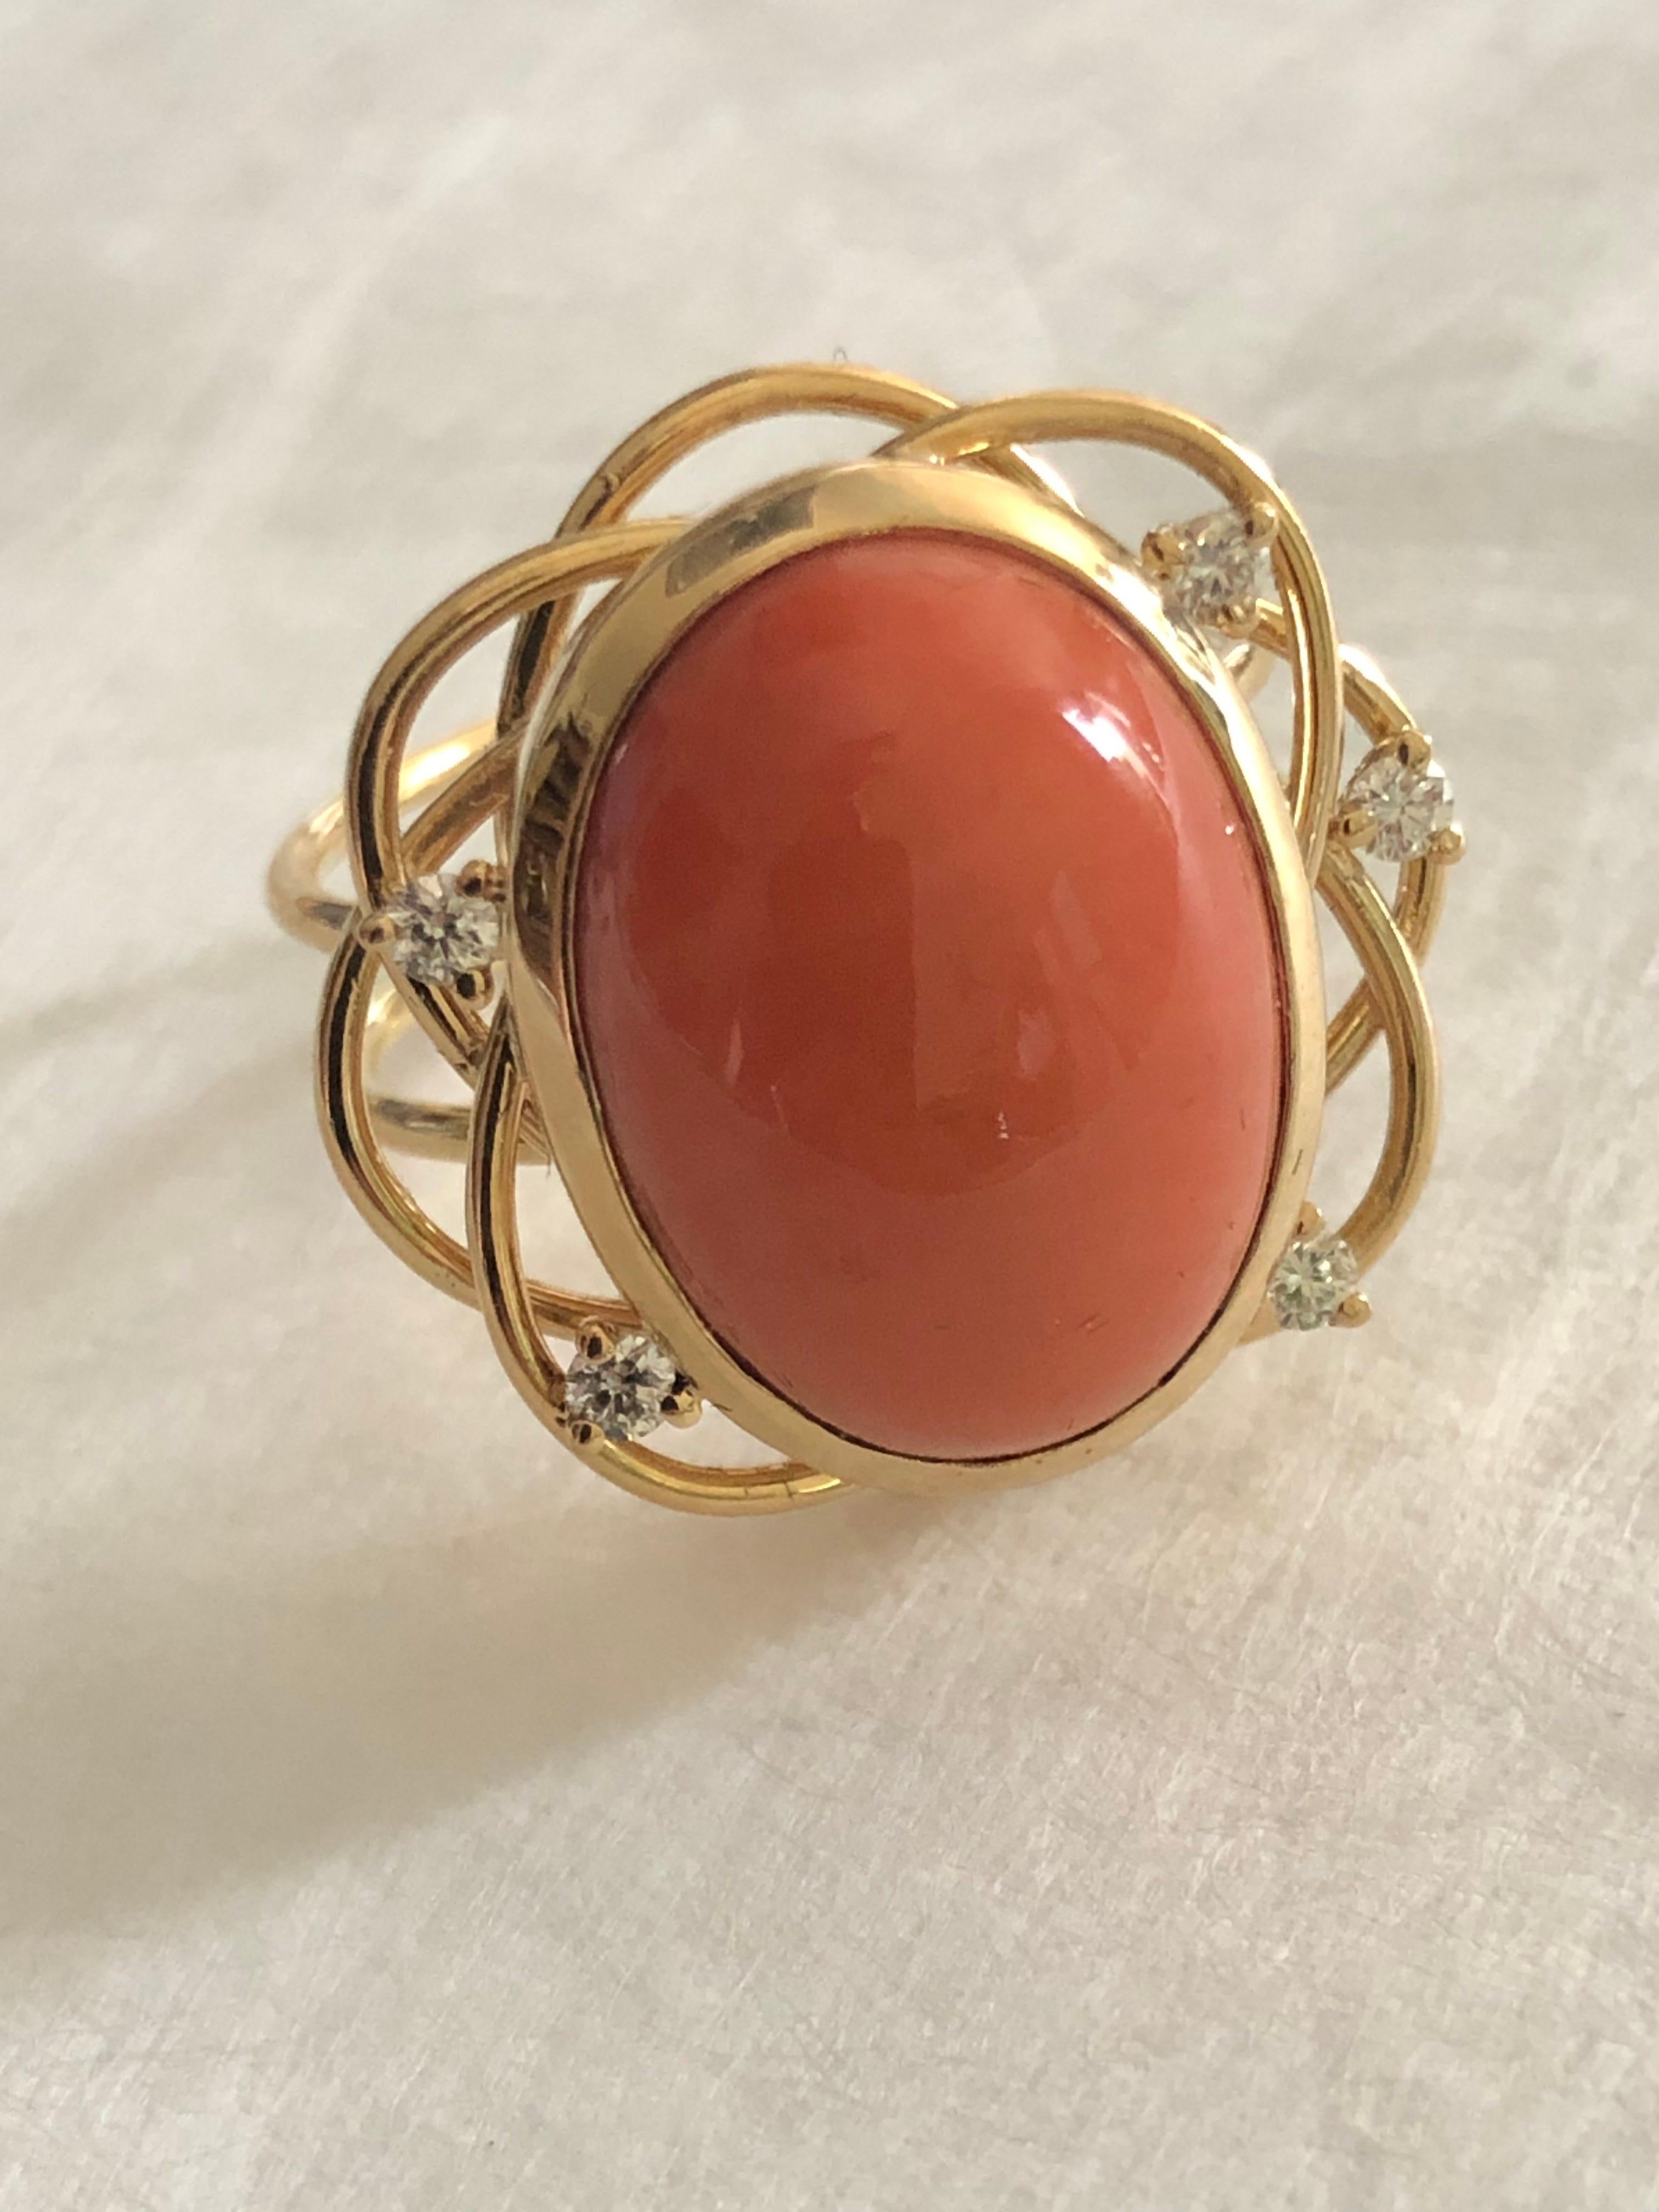 Ring Cabochon Coral and 5 Diamonds Yellow Gold 18 Karat Metric 54 For Sale 6